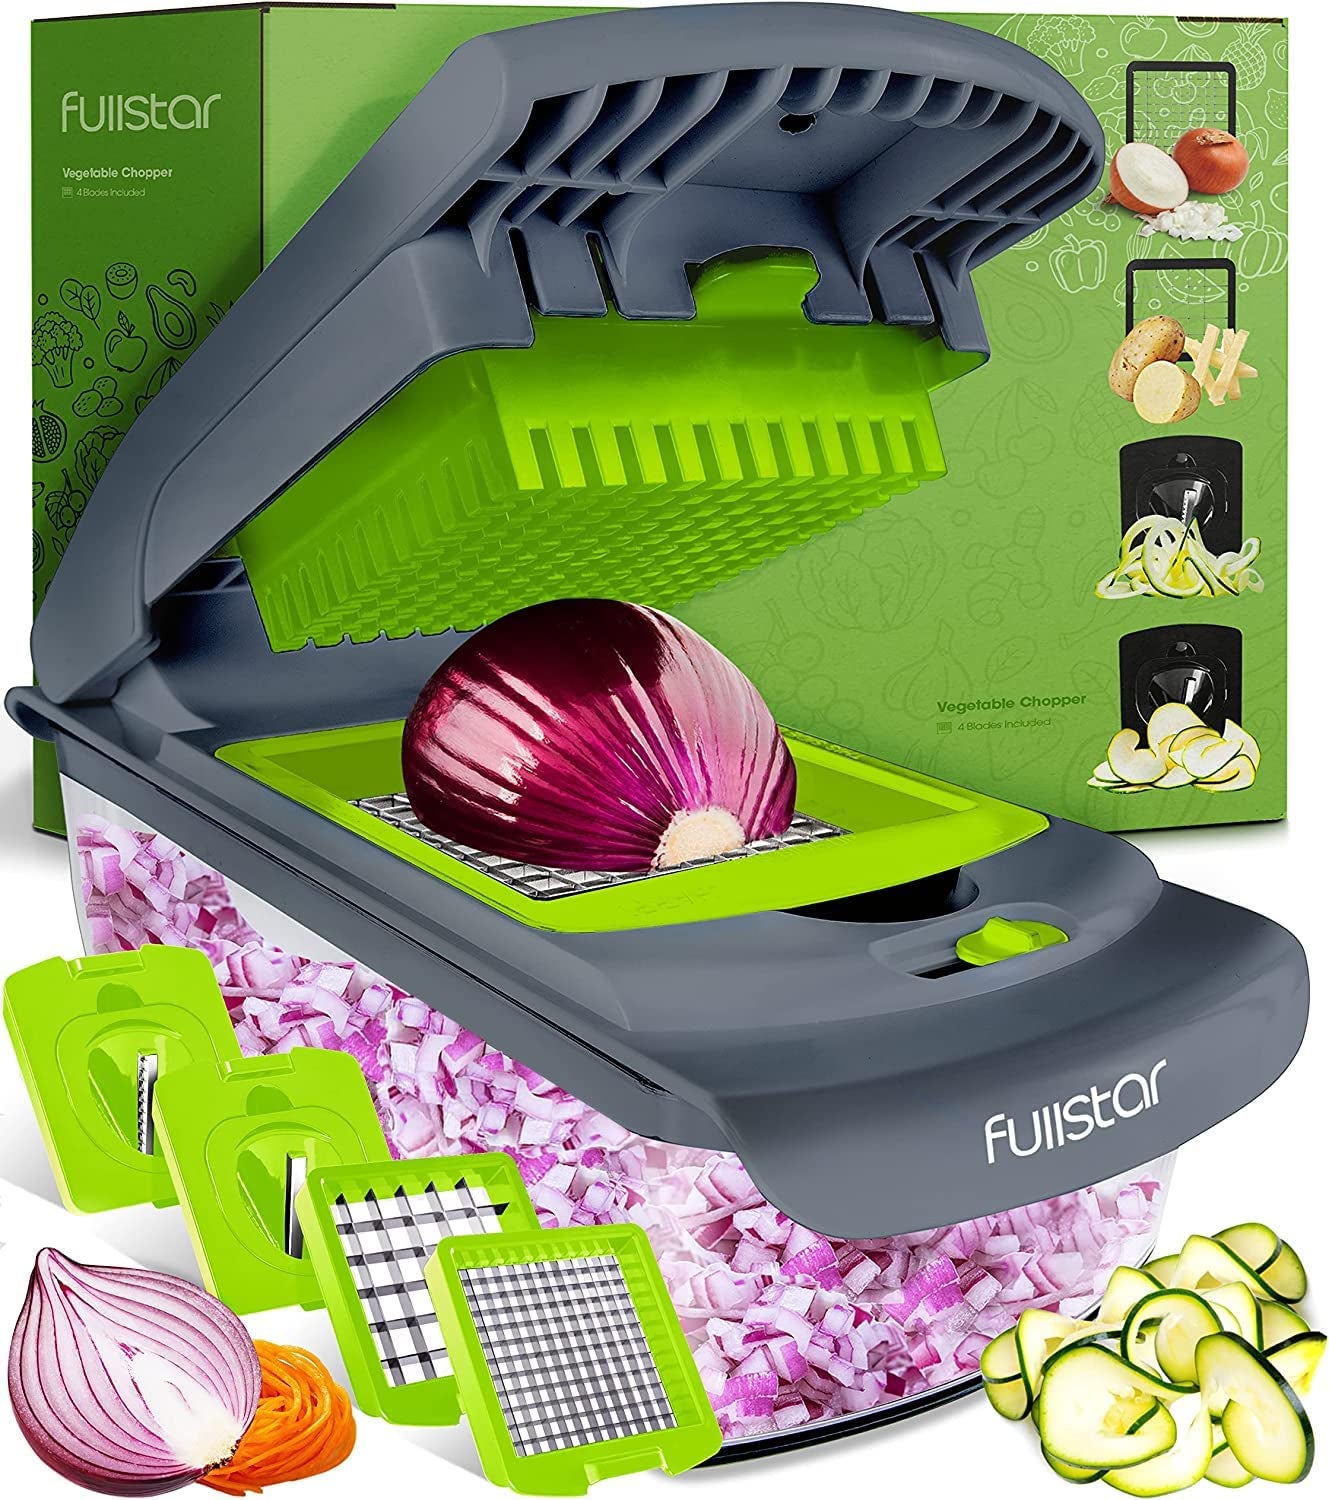 Save yourself time and stress in the kitchen with Fullstar's vegetable, veggie chopper